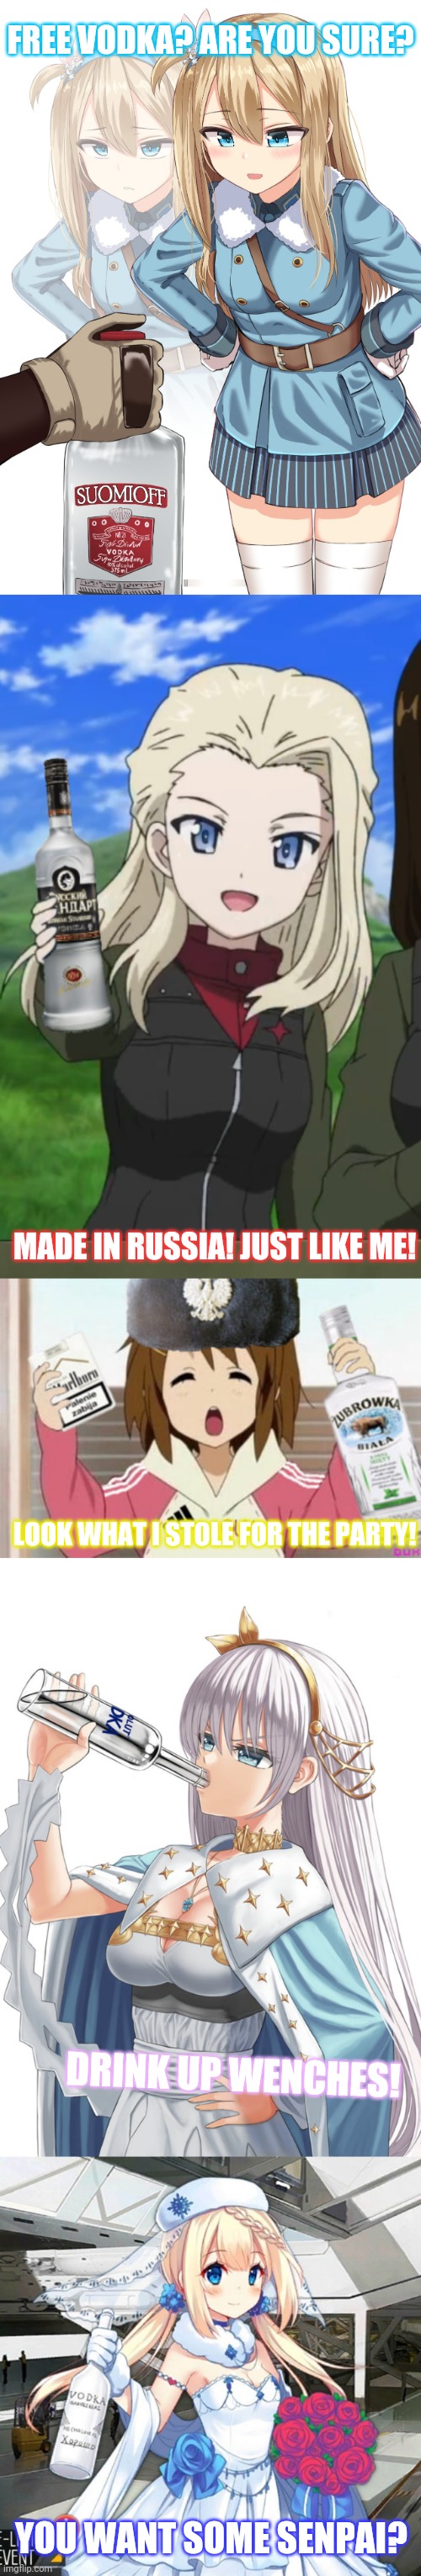 Anime vodka party! | FREE VODKA? ARE YOU SURE? MADE IN RUSSIA! JUST LIKE ME! LOOK WHAT I STOLE FOR THE PARTY! DRINK UP WENCHES! YOU WANT SOME SENPAI? | image tagged in anime girl,vodka,party,drinking,meanwhile in russia,alcohol | made w/ Imgflip meme maker